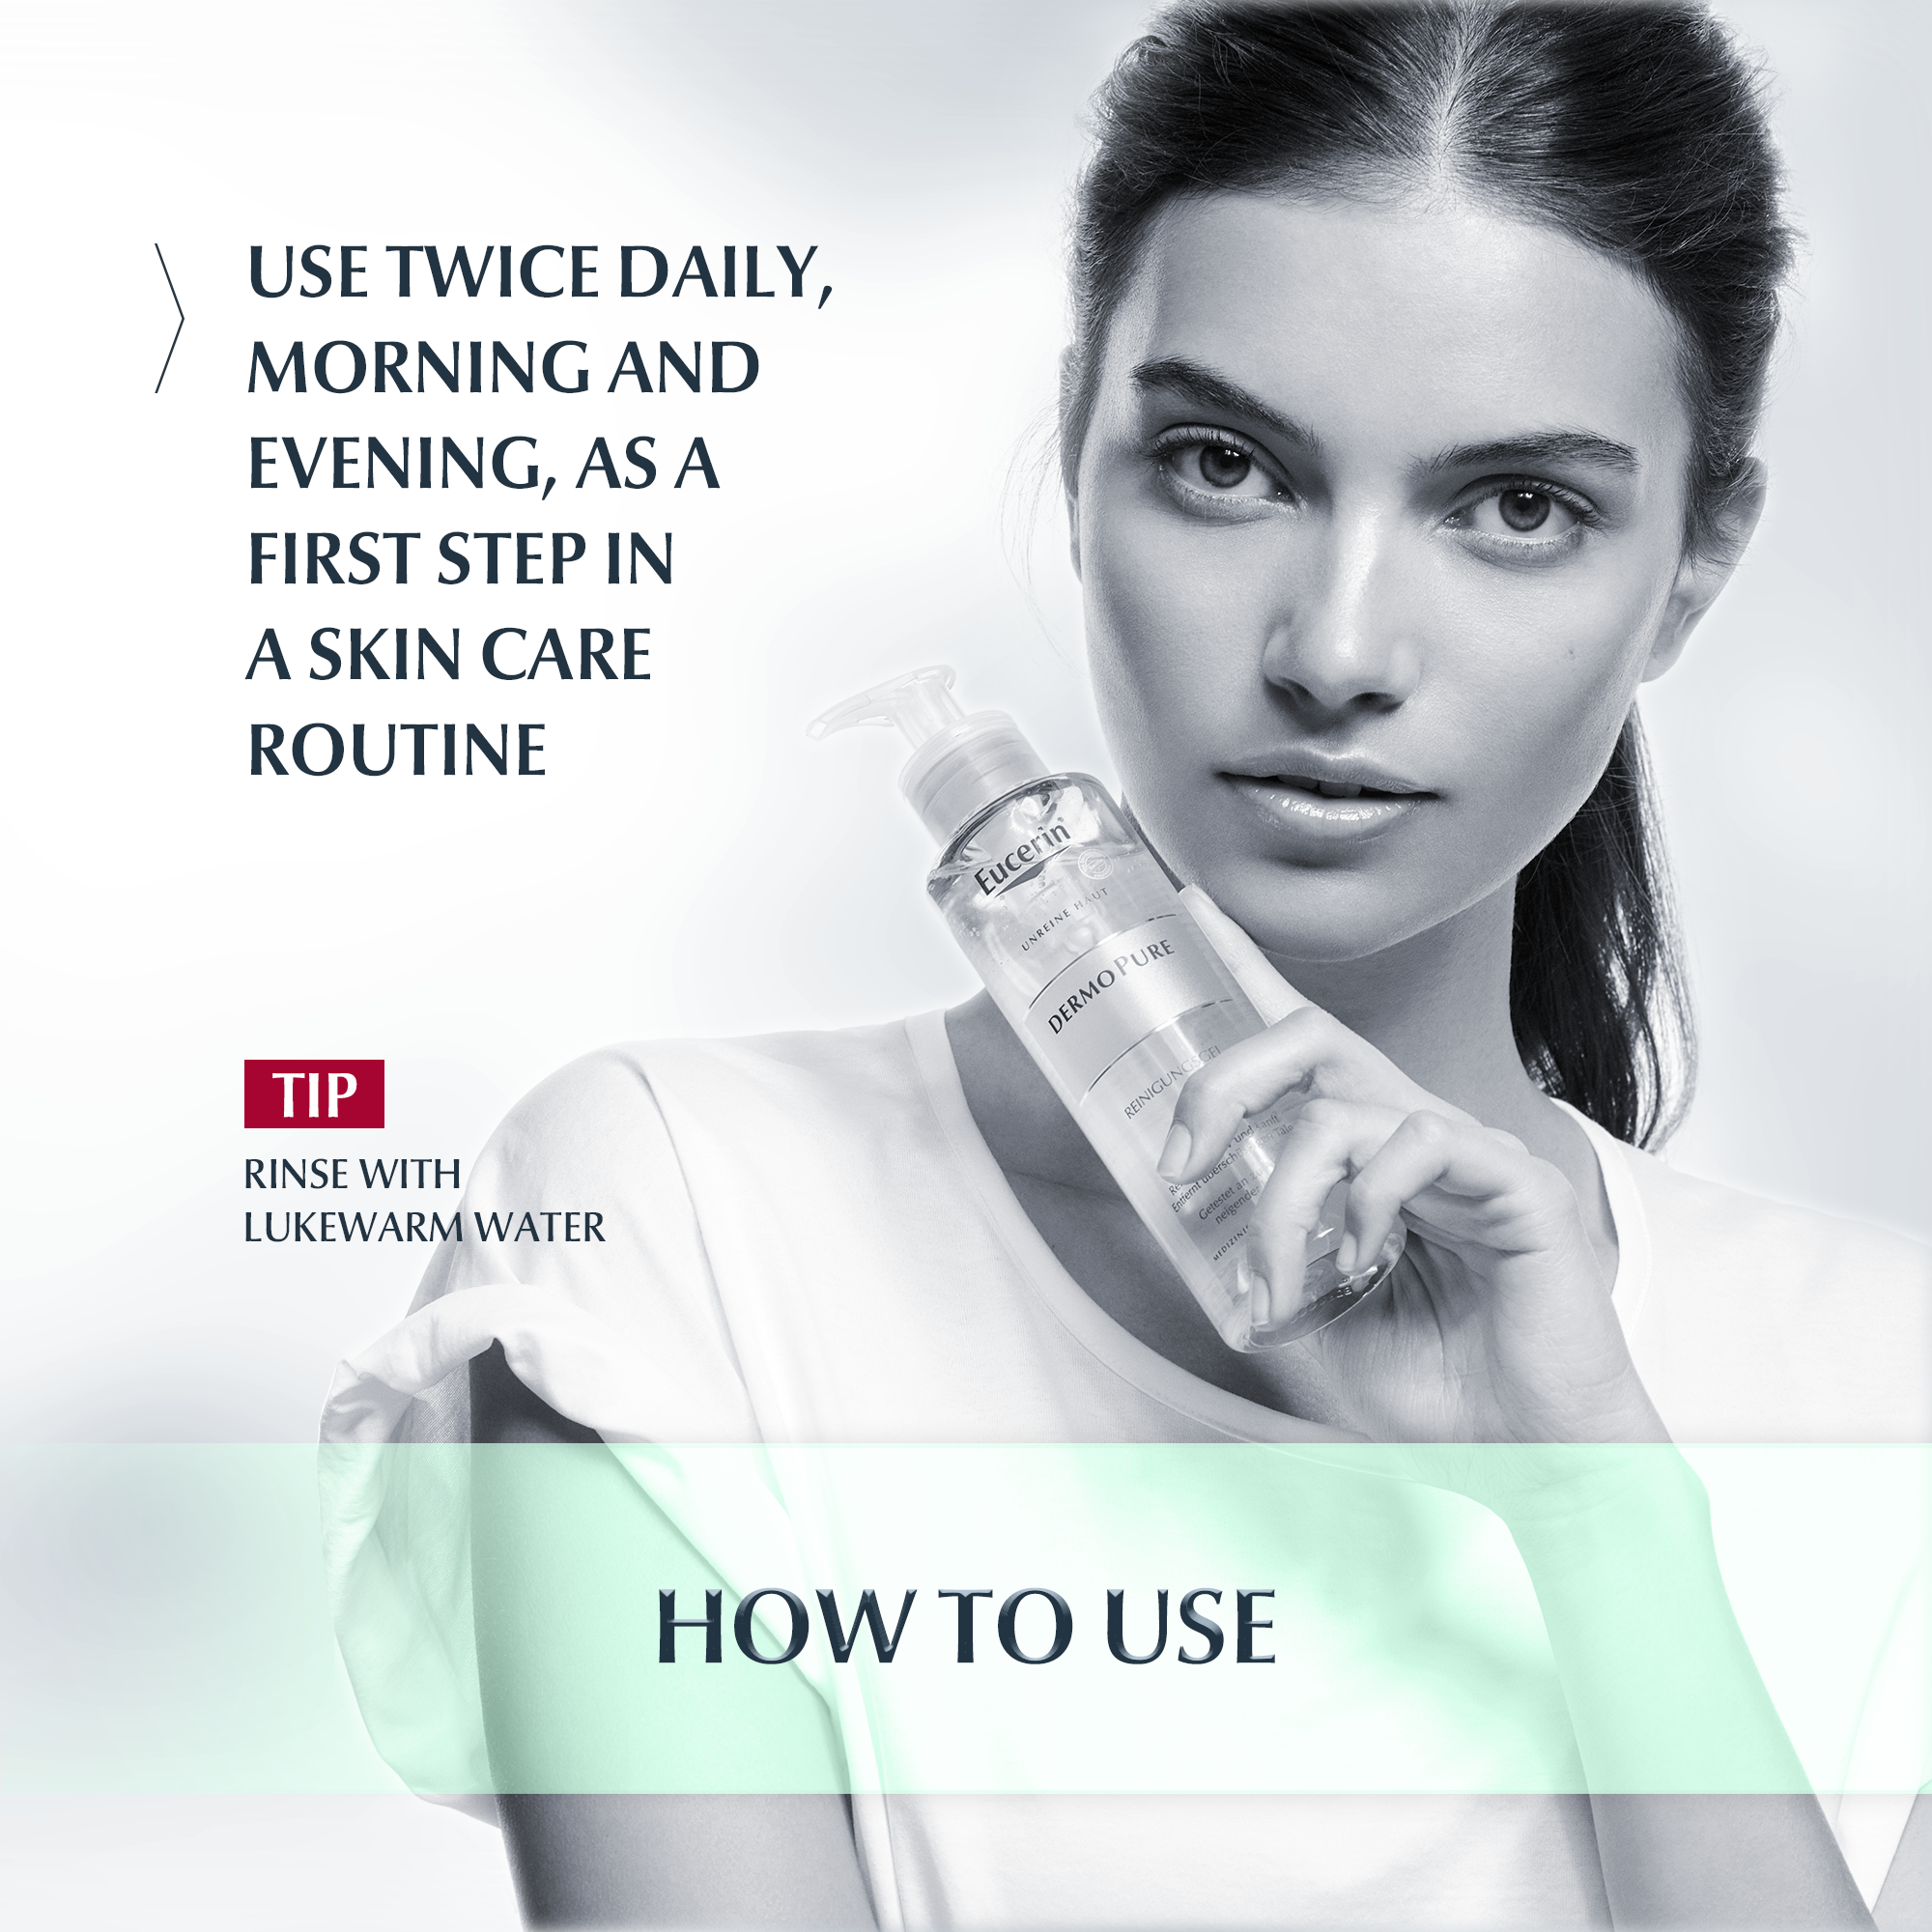 cleansing gel how to use